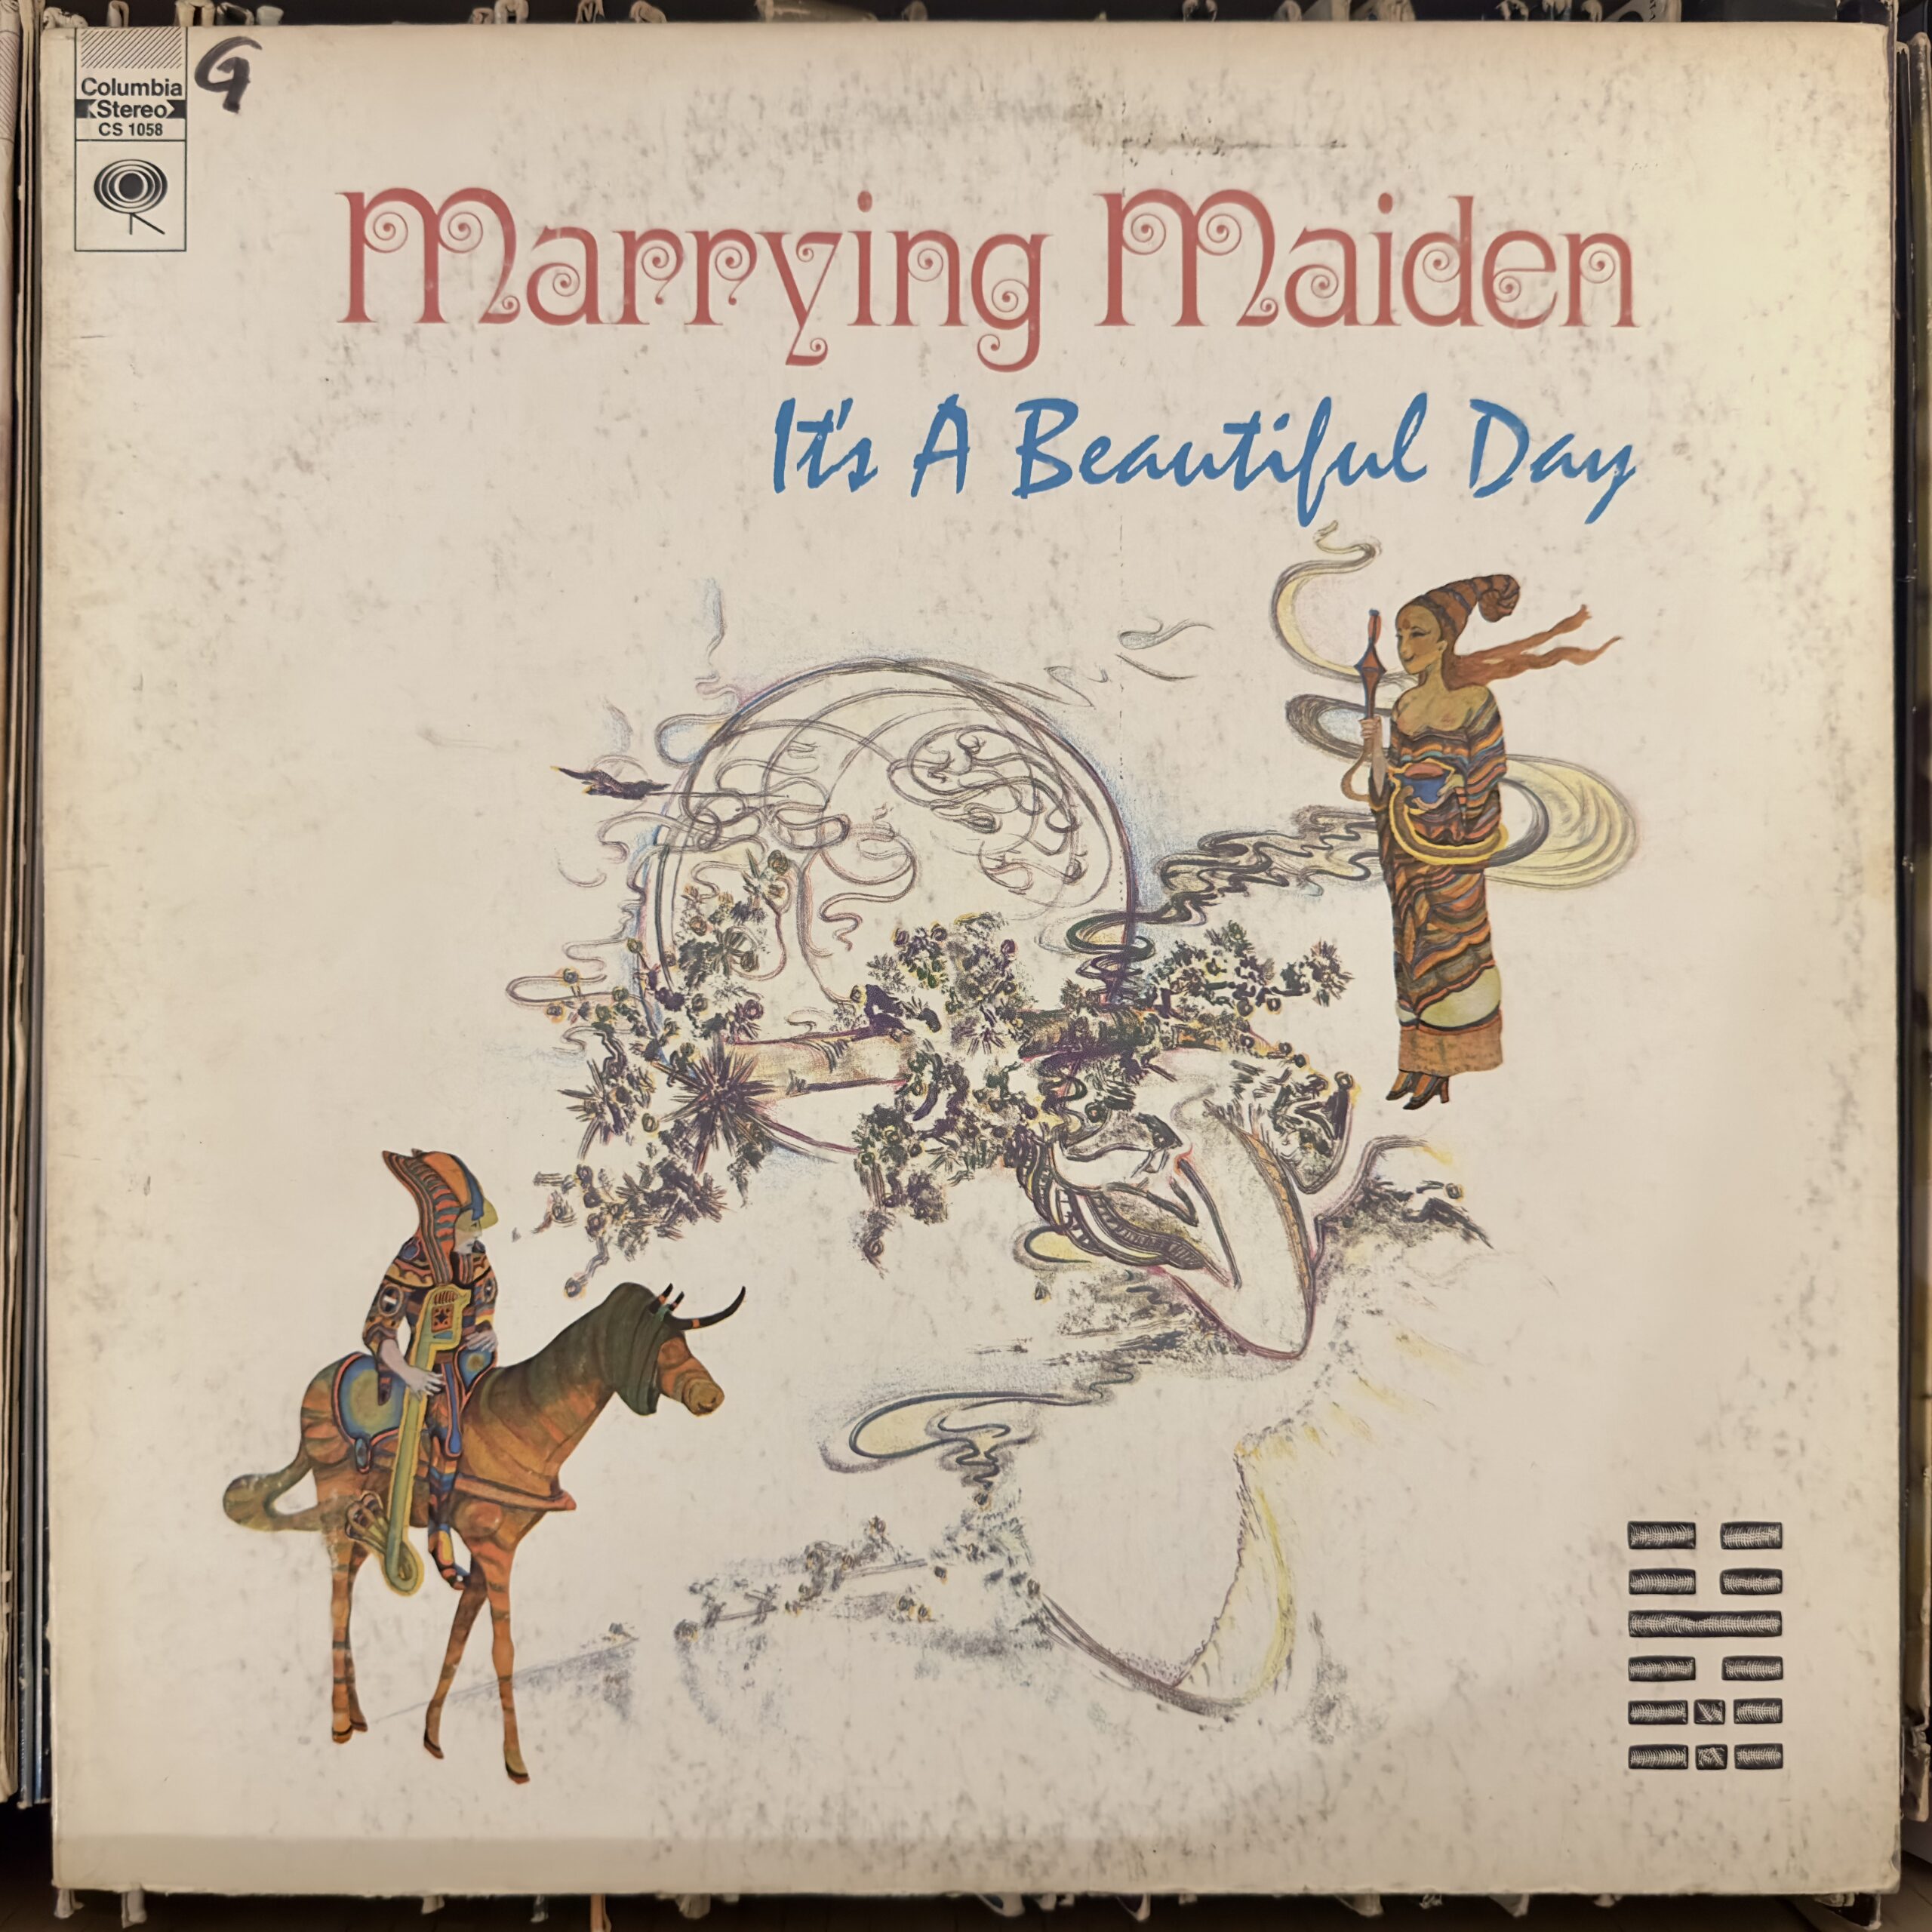 Marrying Maiden by It's a Beautiful Day